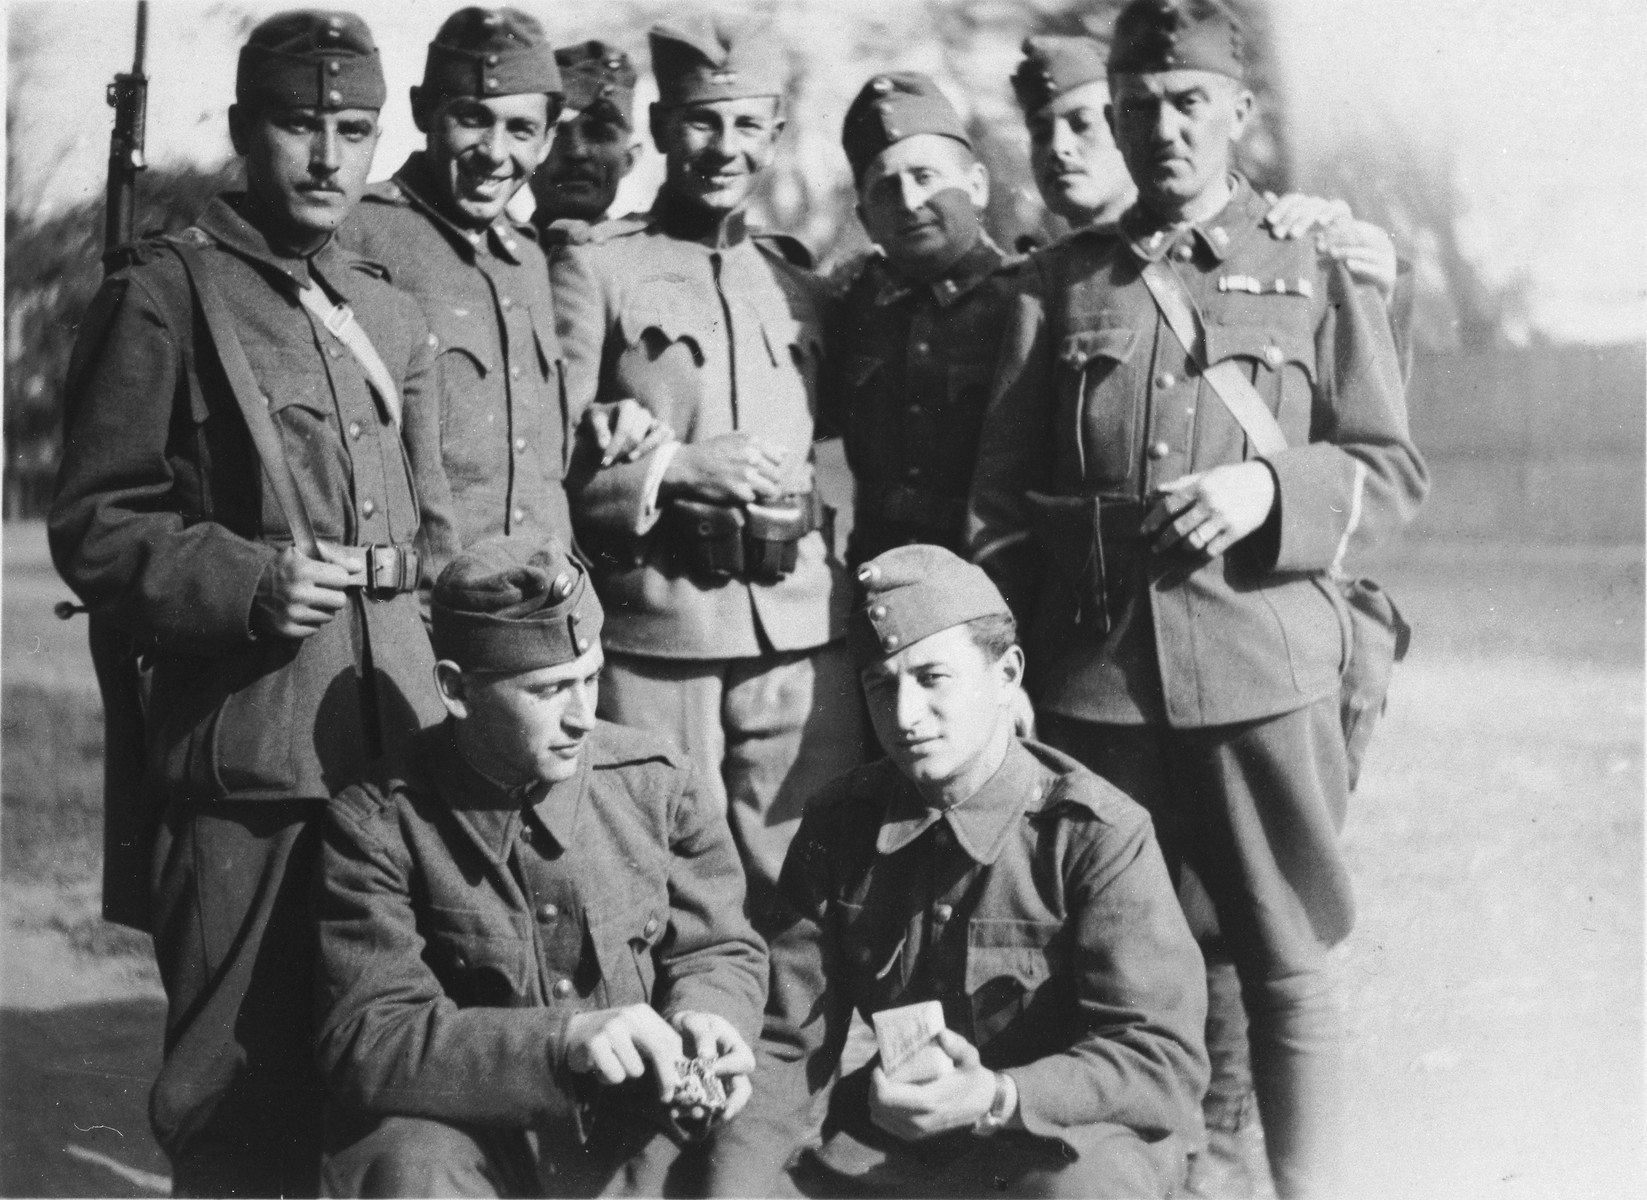 Group portrait of former Jewish soldiers now conscripted into a Hungarian forced labor battalion.

Jeno Lebowiz is pictured in the front, right corner.